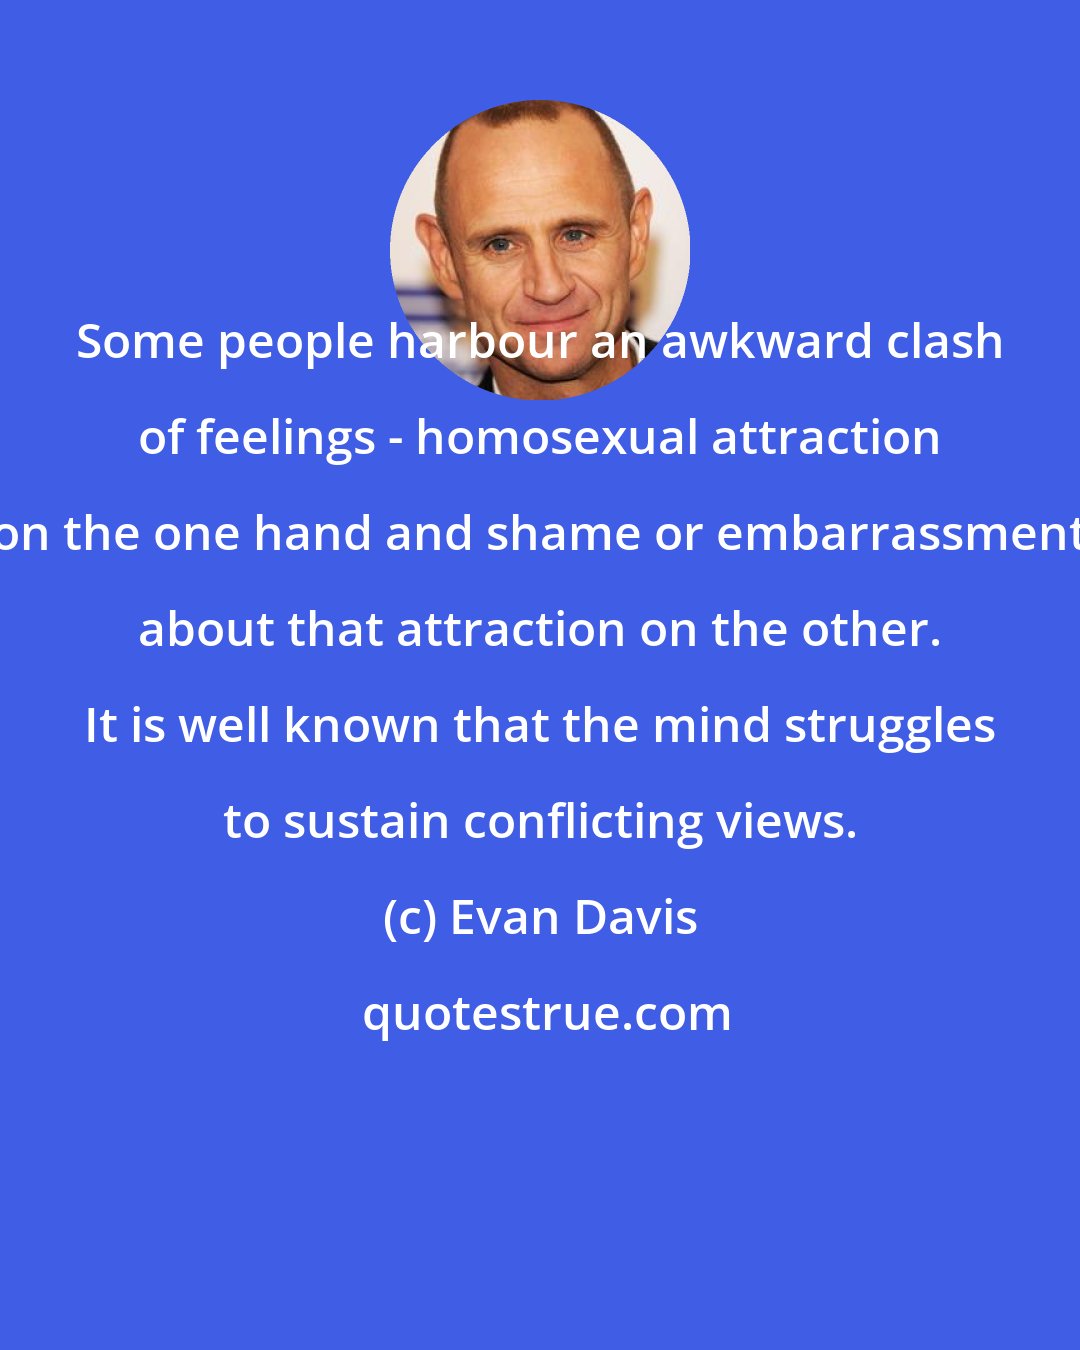 Evan Davis: Some people harbour an awkward clash of feelings - homosexual attraction on the one hand and shame or embarrassment about that attraction on the other. It is well known that the mind struggles to sustain conflicting views.